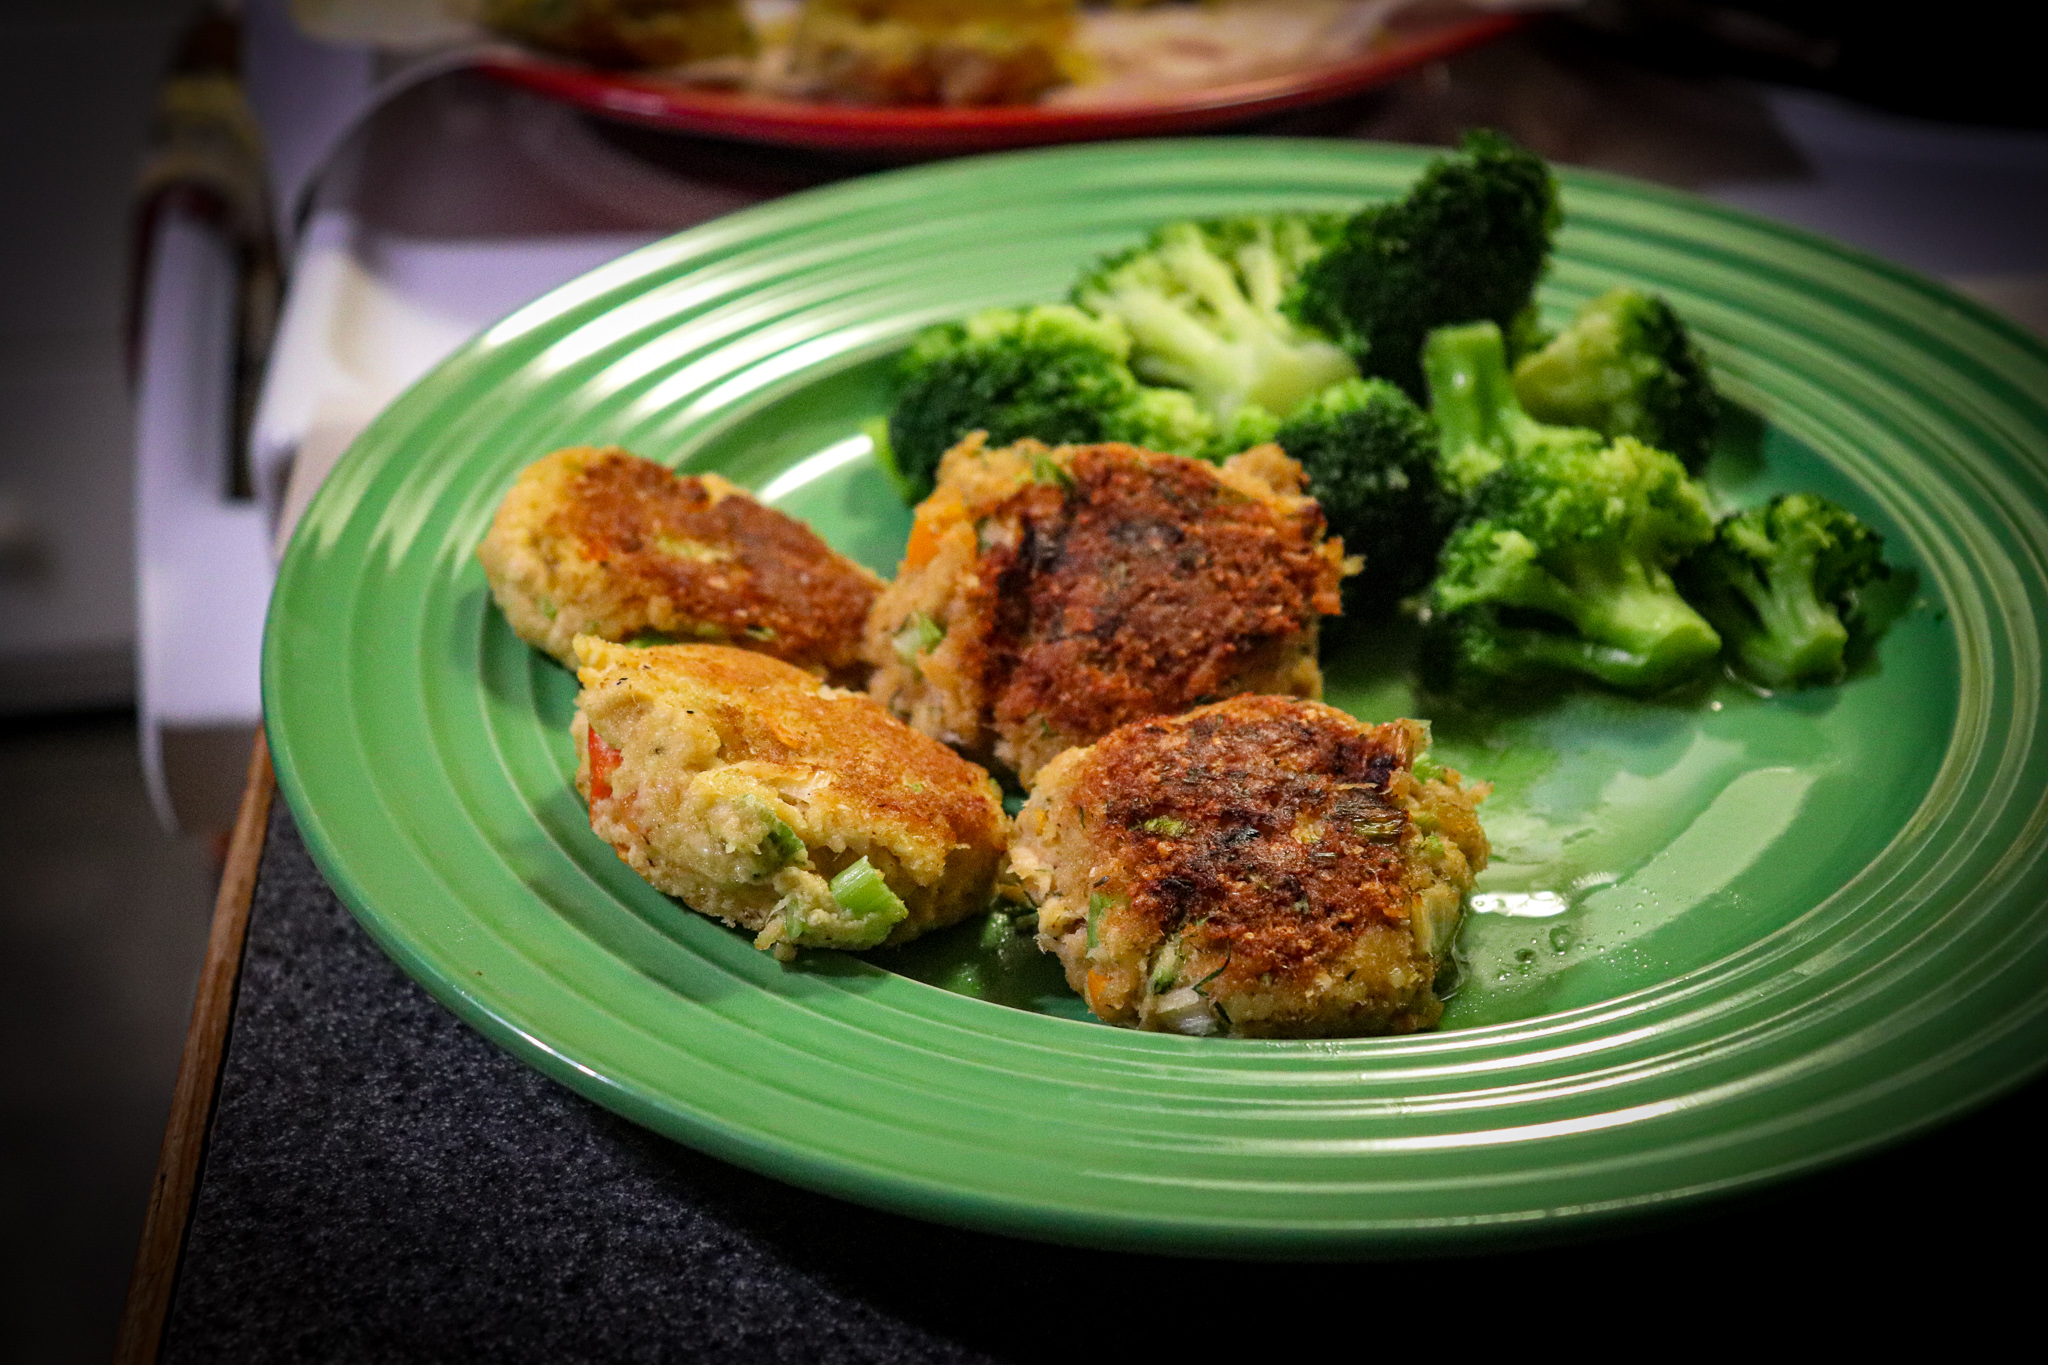 Keto Seafood Cakes - Crab and Salmon Cakes